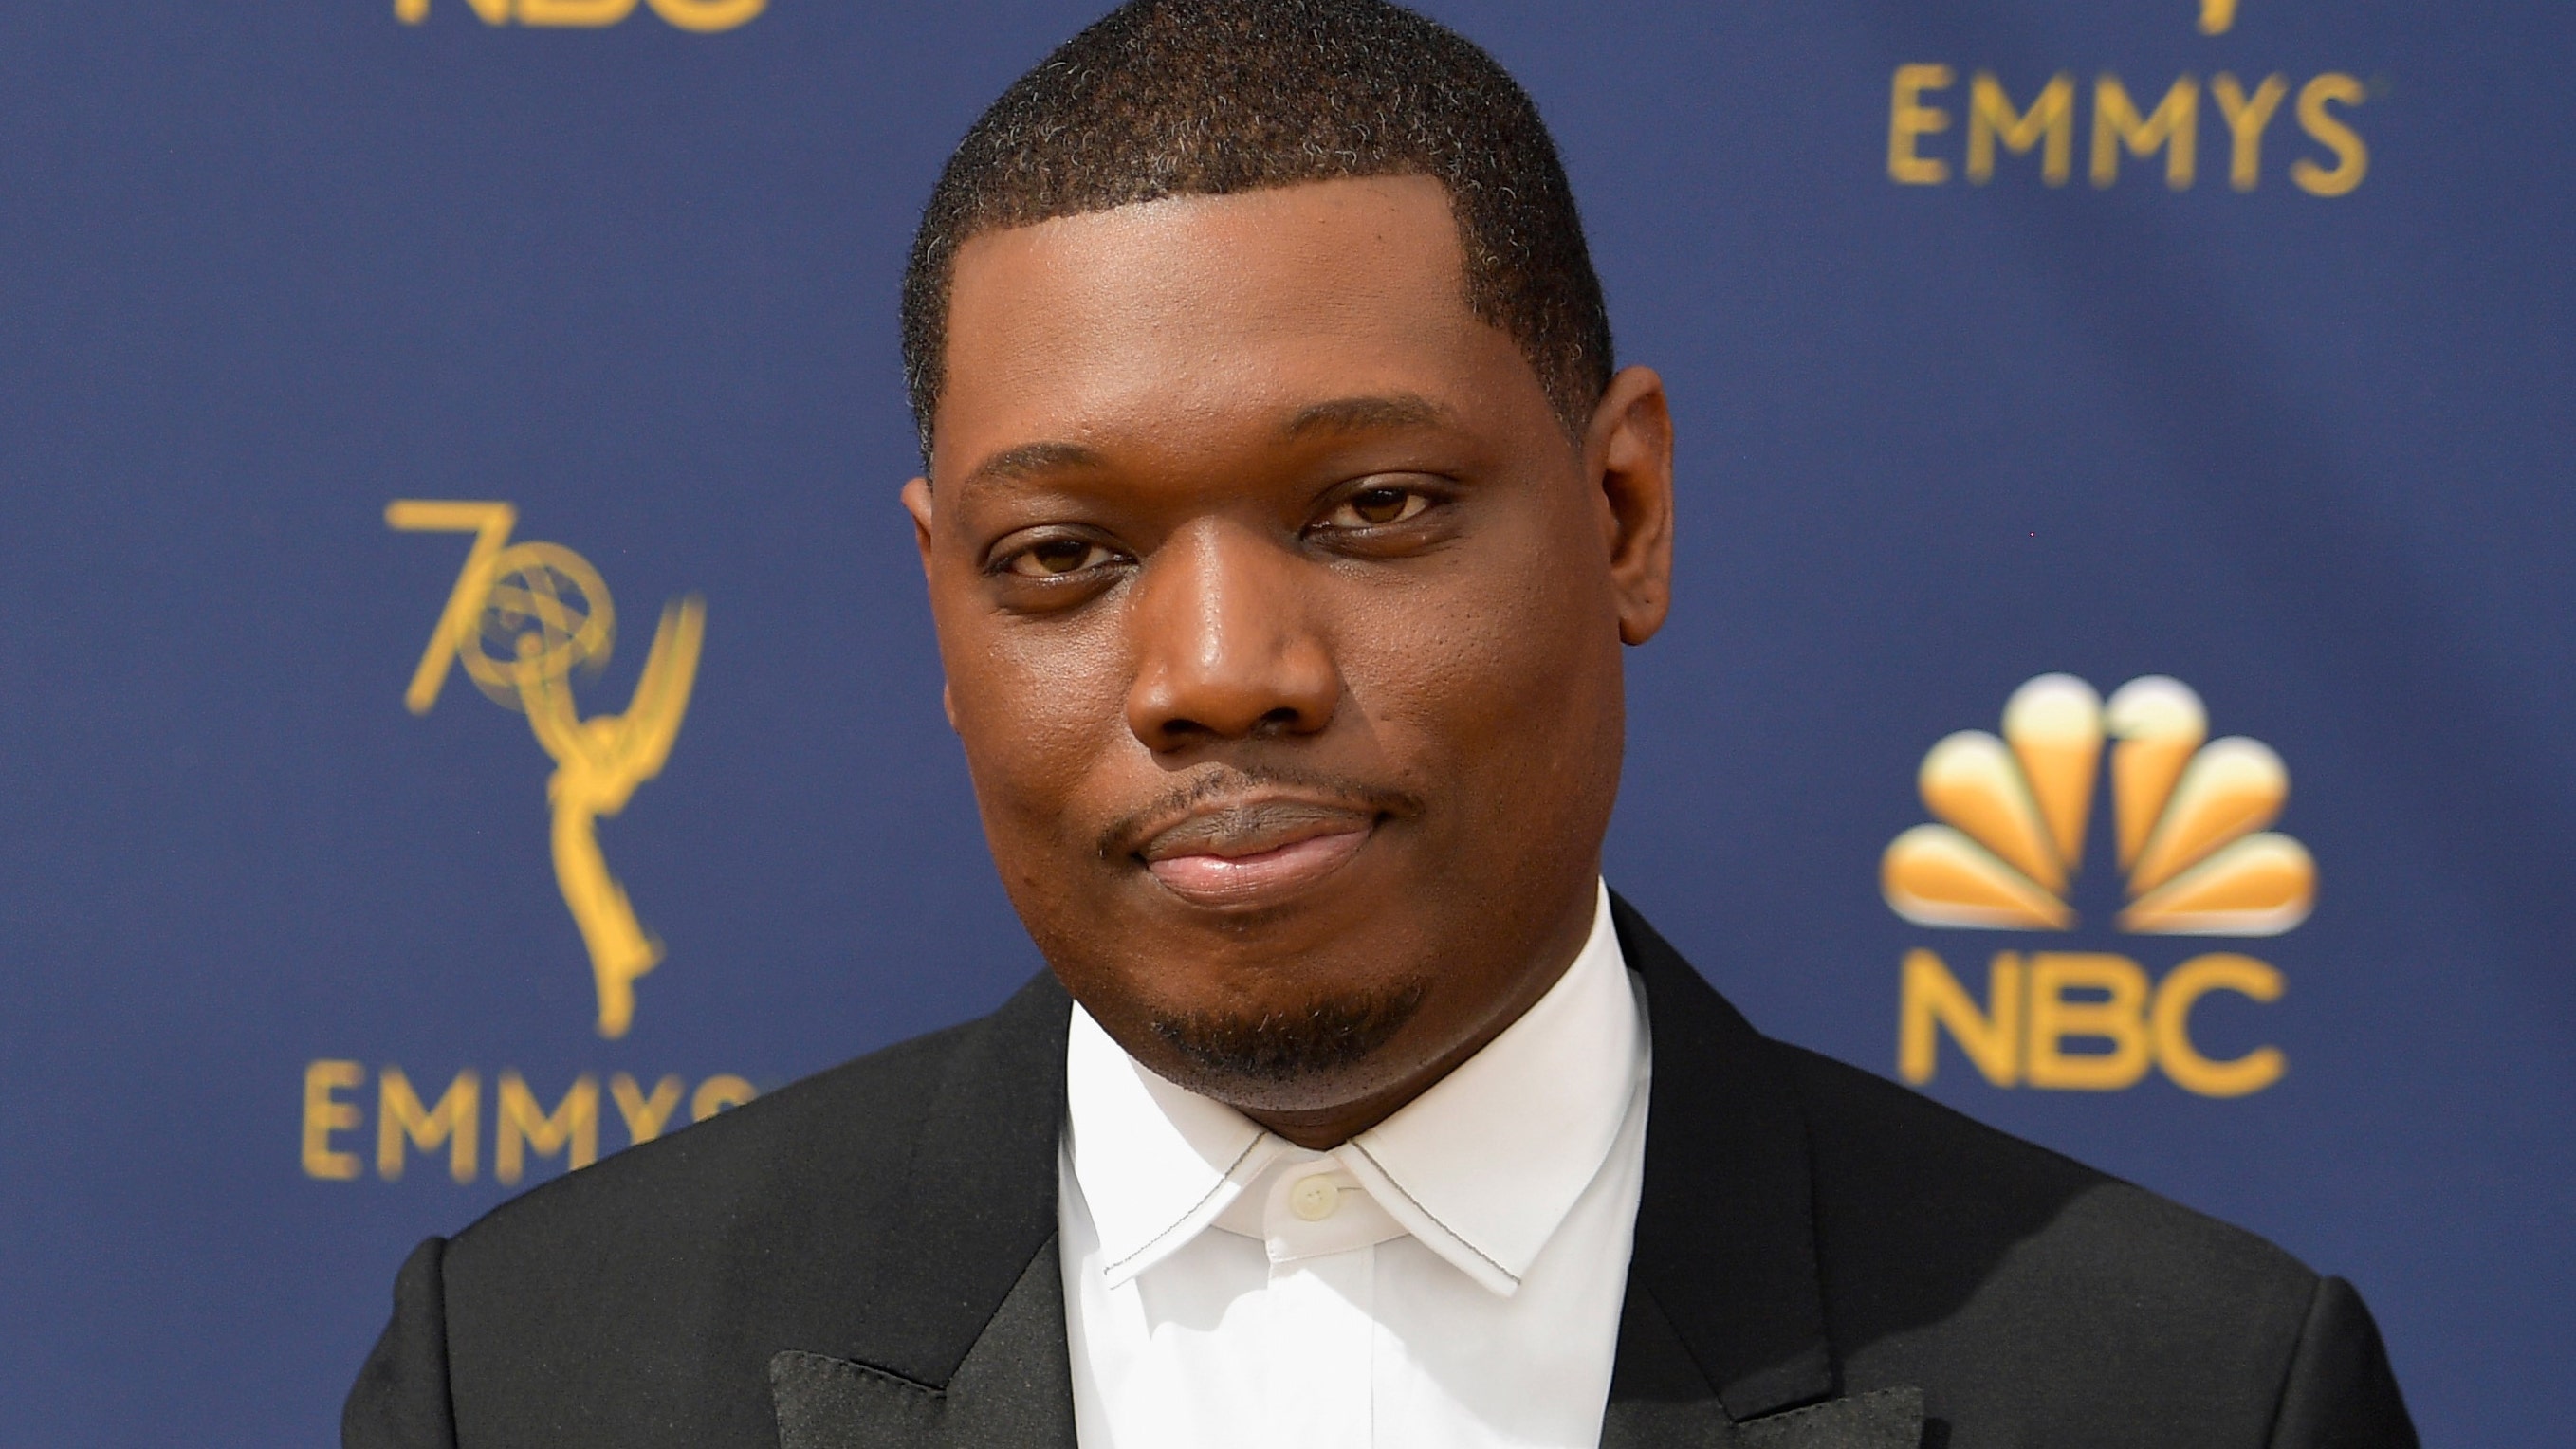 ‘Saturday Night Live’ star Michael Che gets a backlash for the ‘Weekend Update’ joke, which some consider anti-Semitic